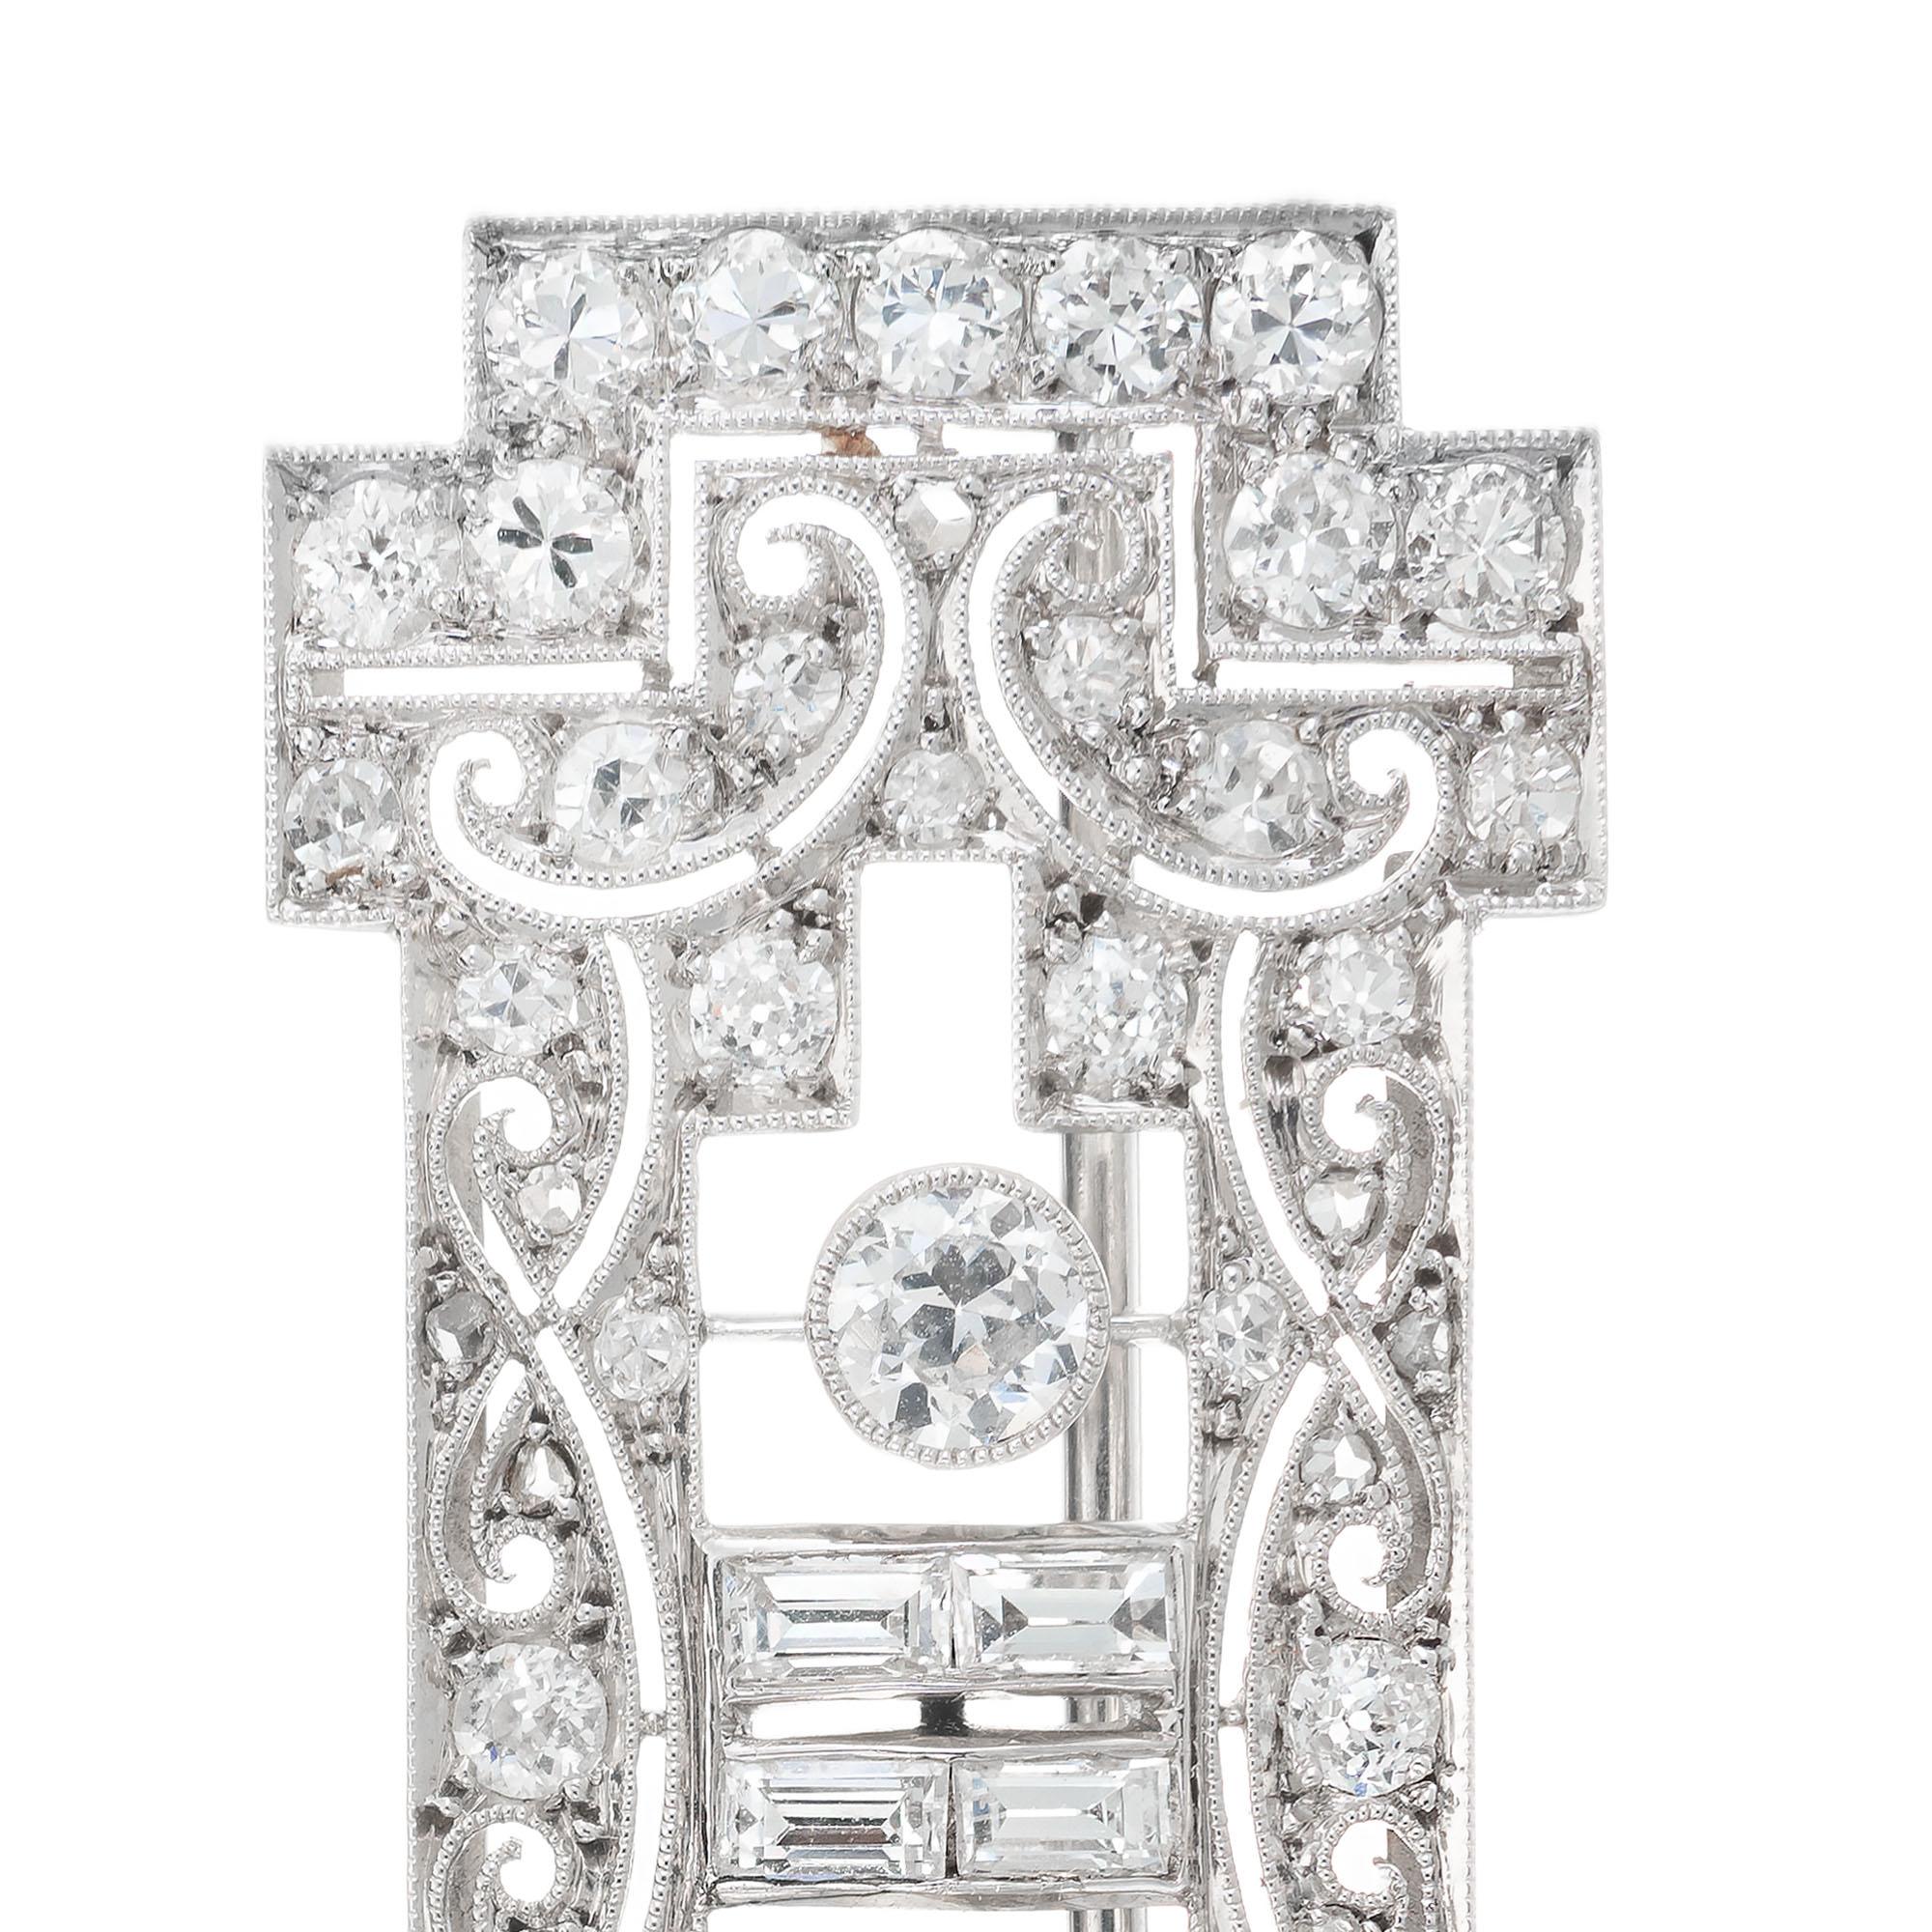 Edwardian 2.75 Carat Diamond Platinum Bar Brooch In Good Condition For Sale In Stamford, CT